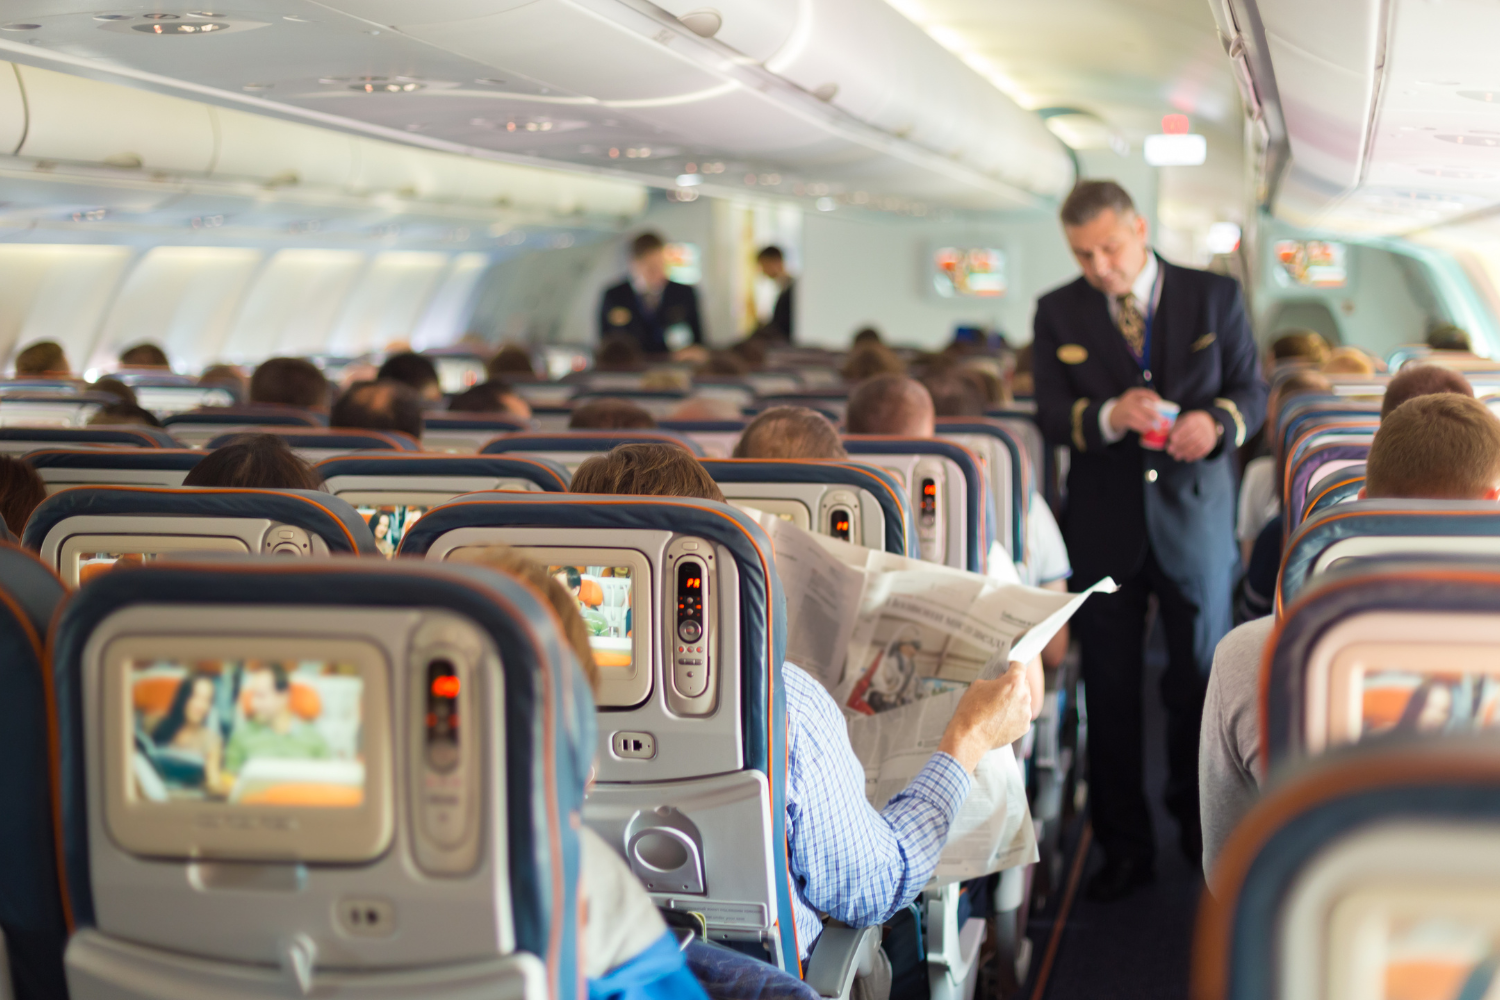 a male pilot walking in the isle inside the flight and passengers being seated 